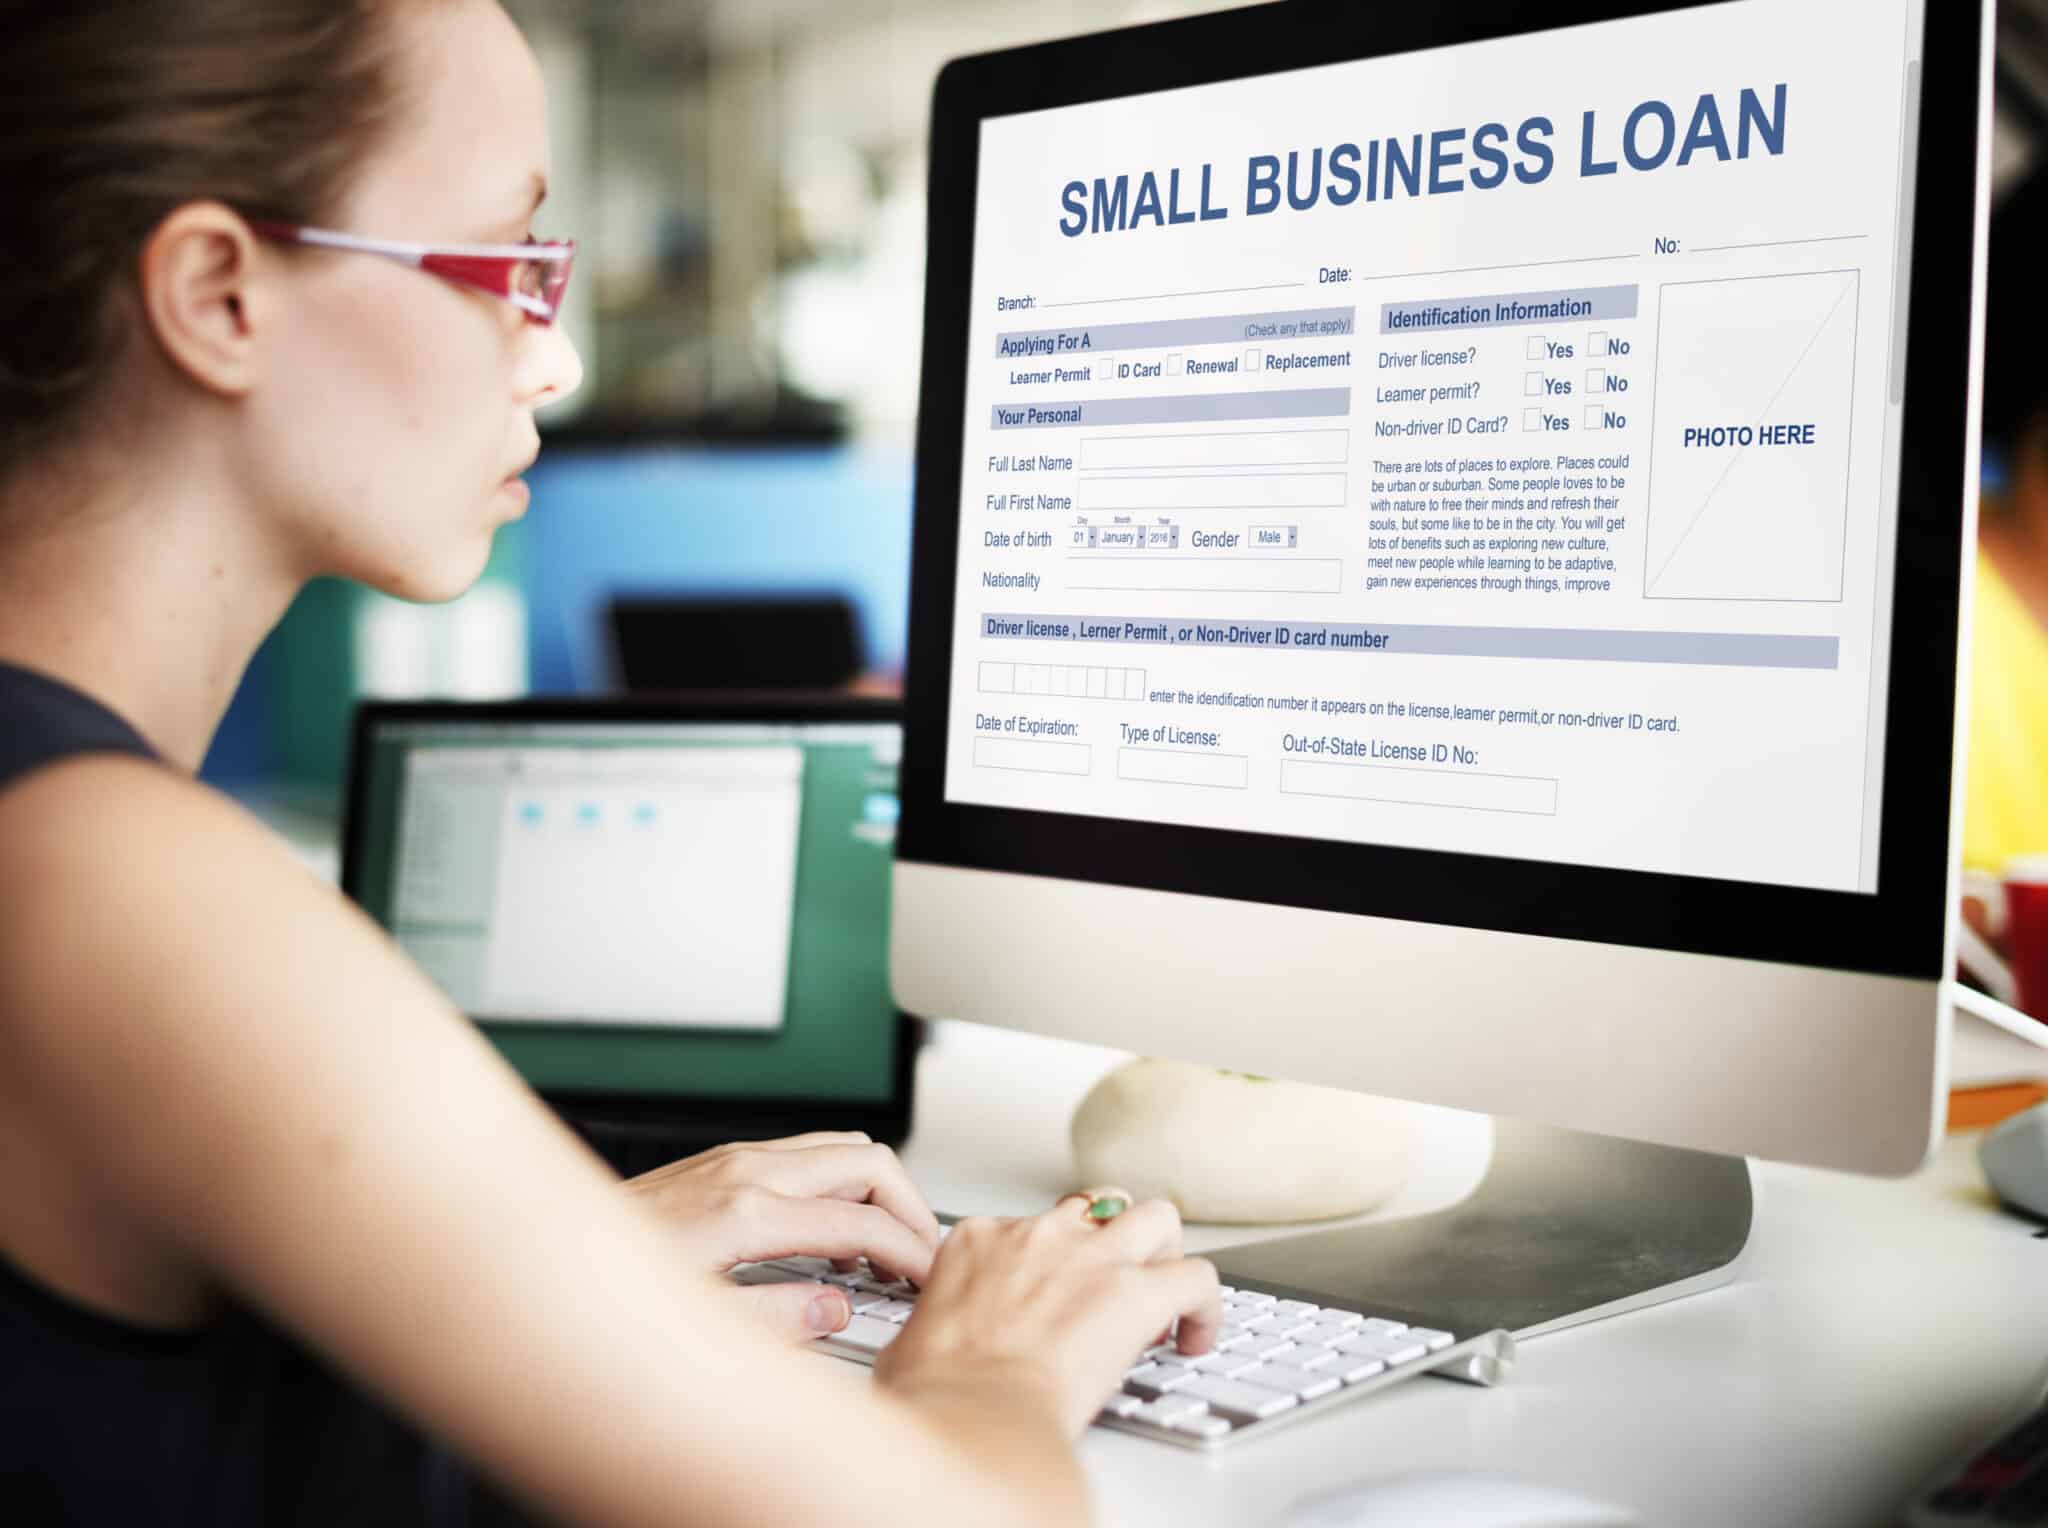 How Hard Is It to Get a Business Loan - Business Loans